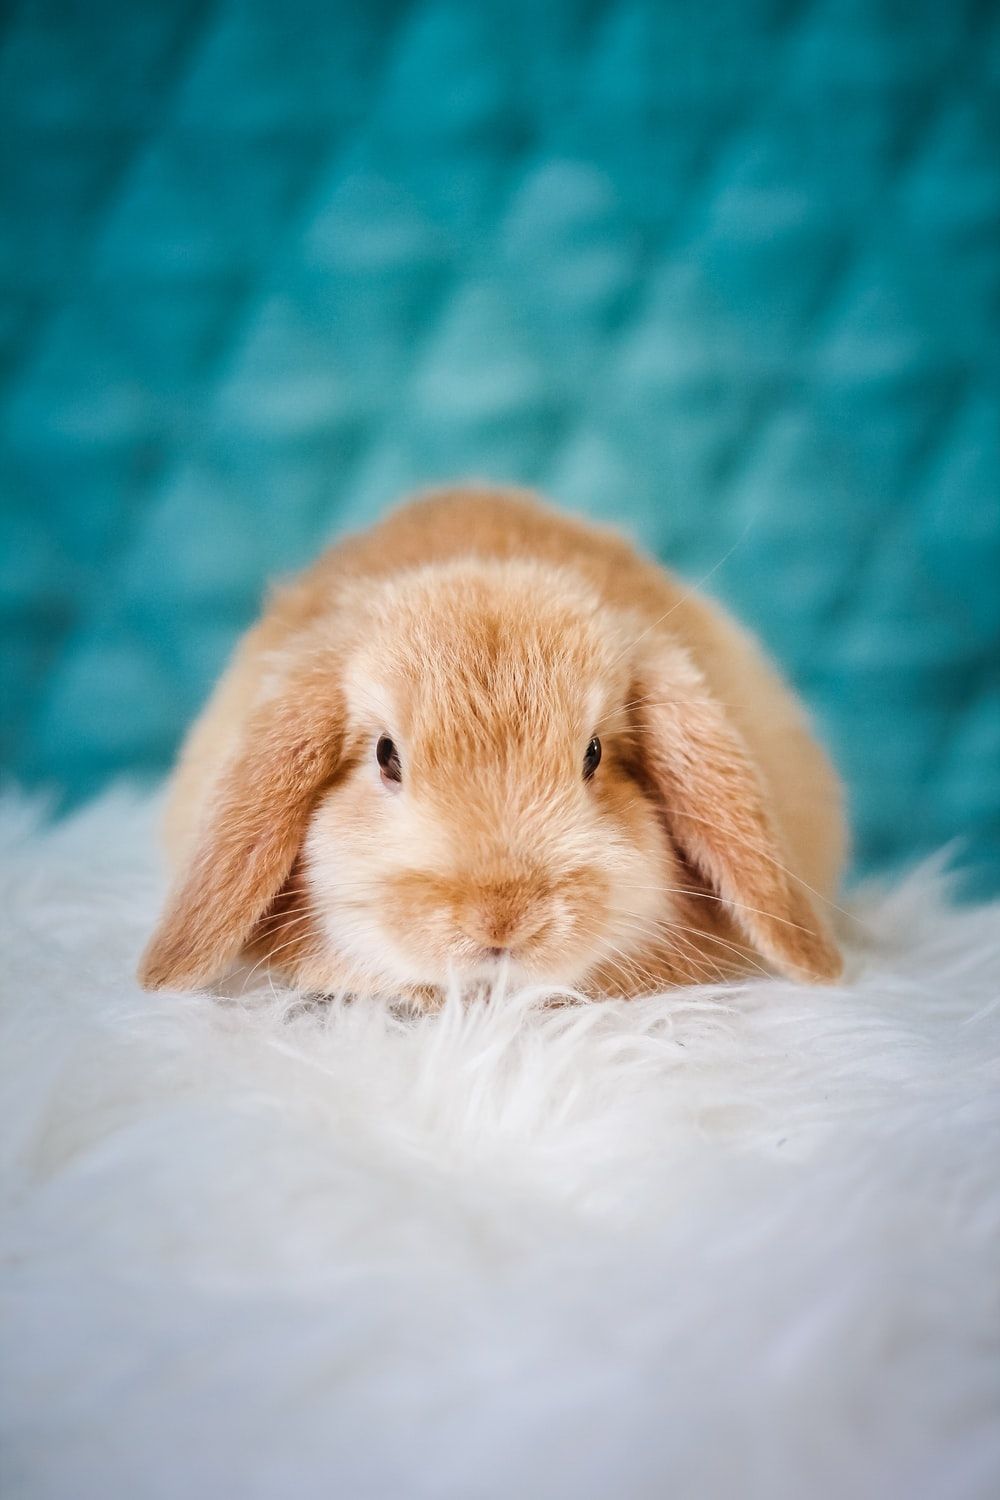 Bunny Picture [HQ]. Download Free Image